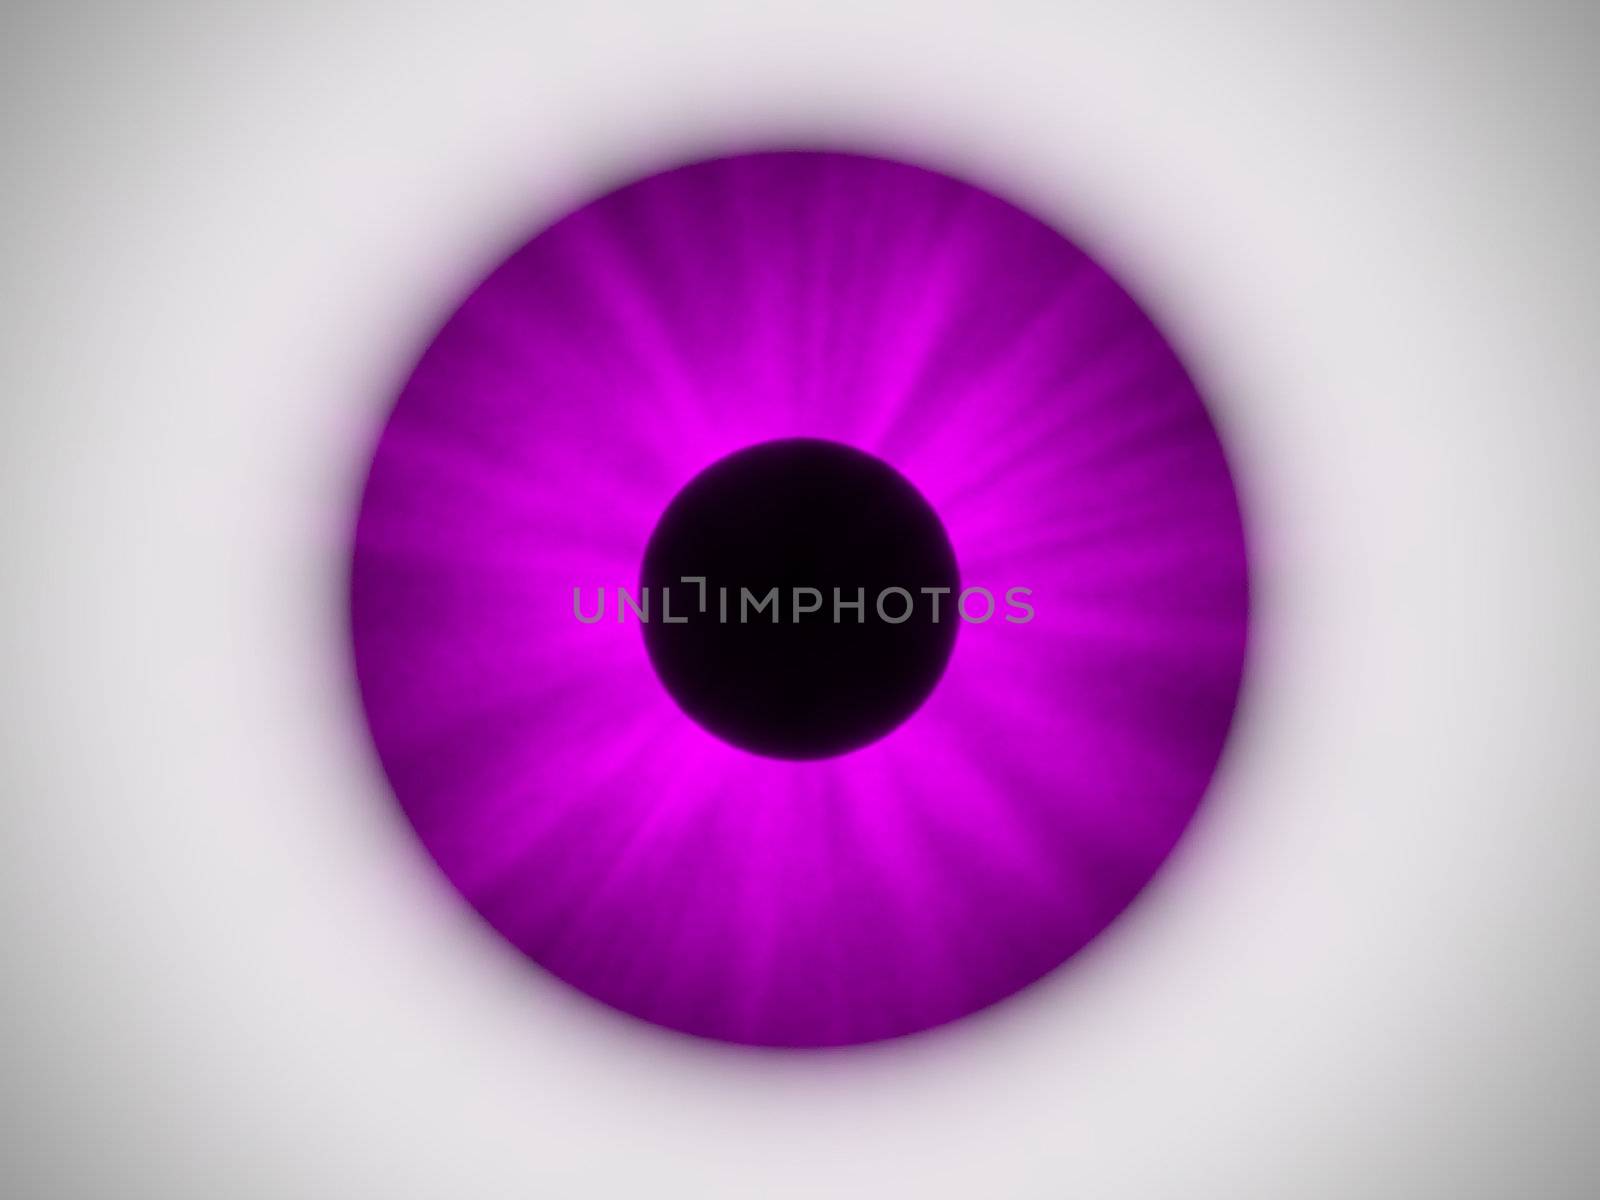 That image shows a generated purple eye